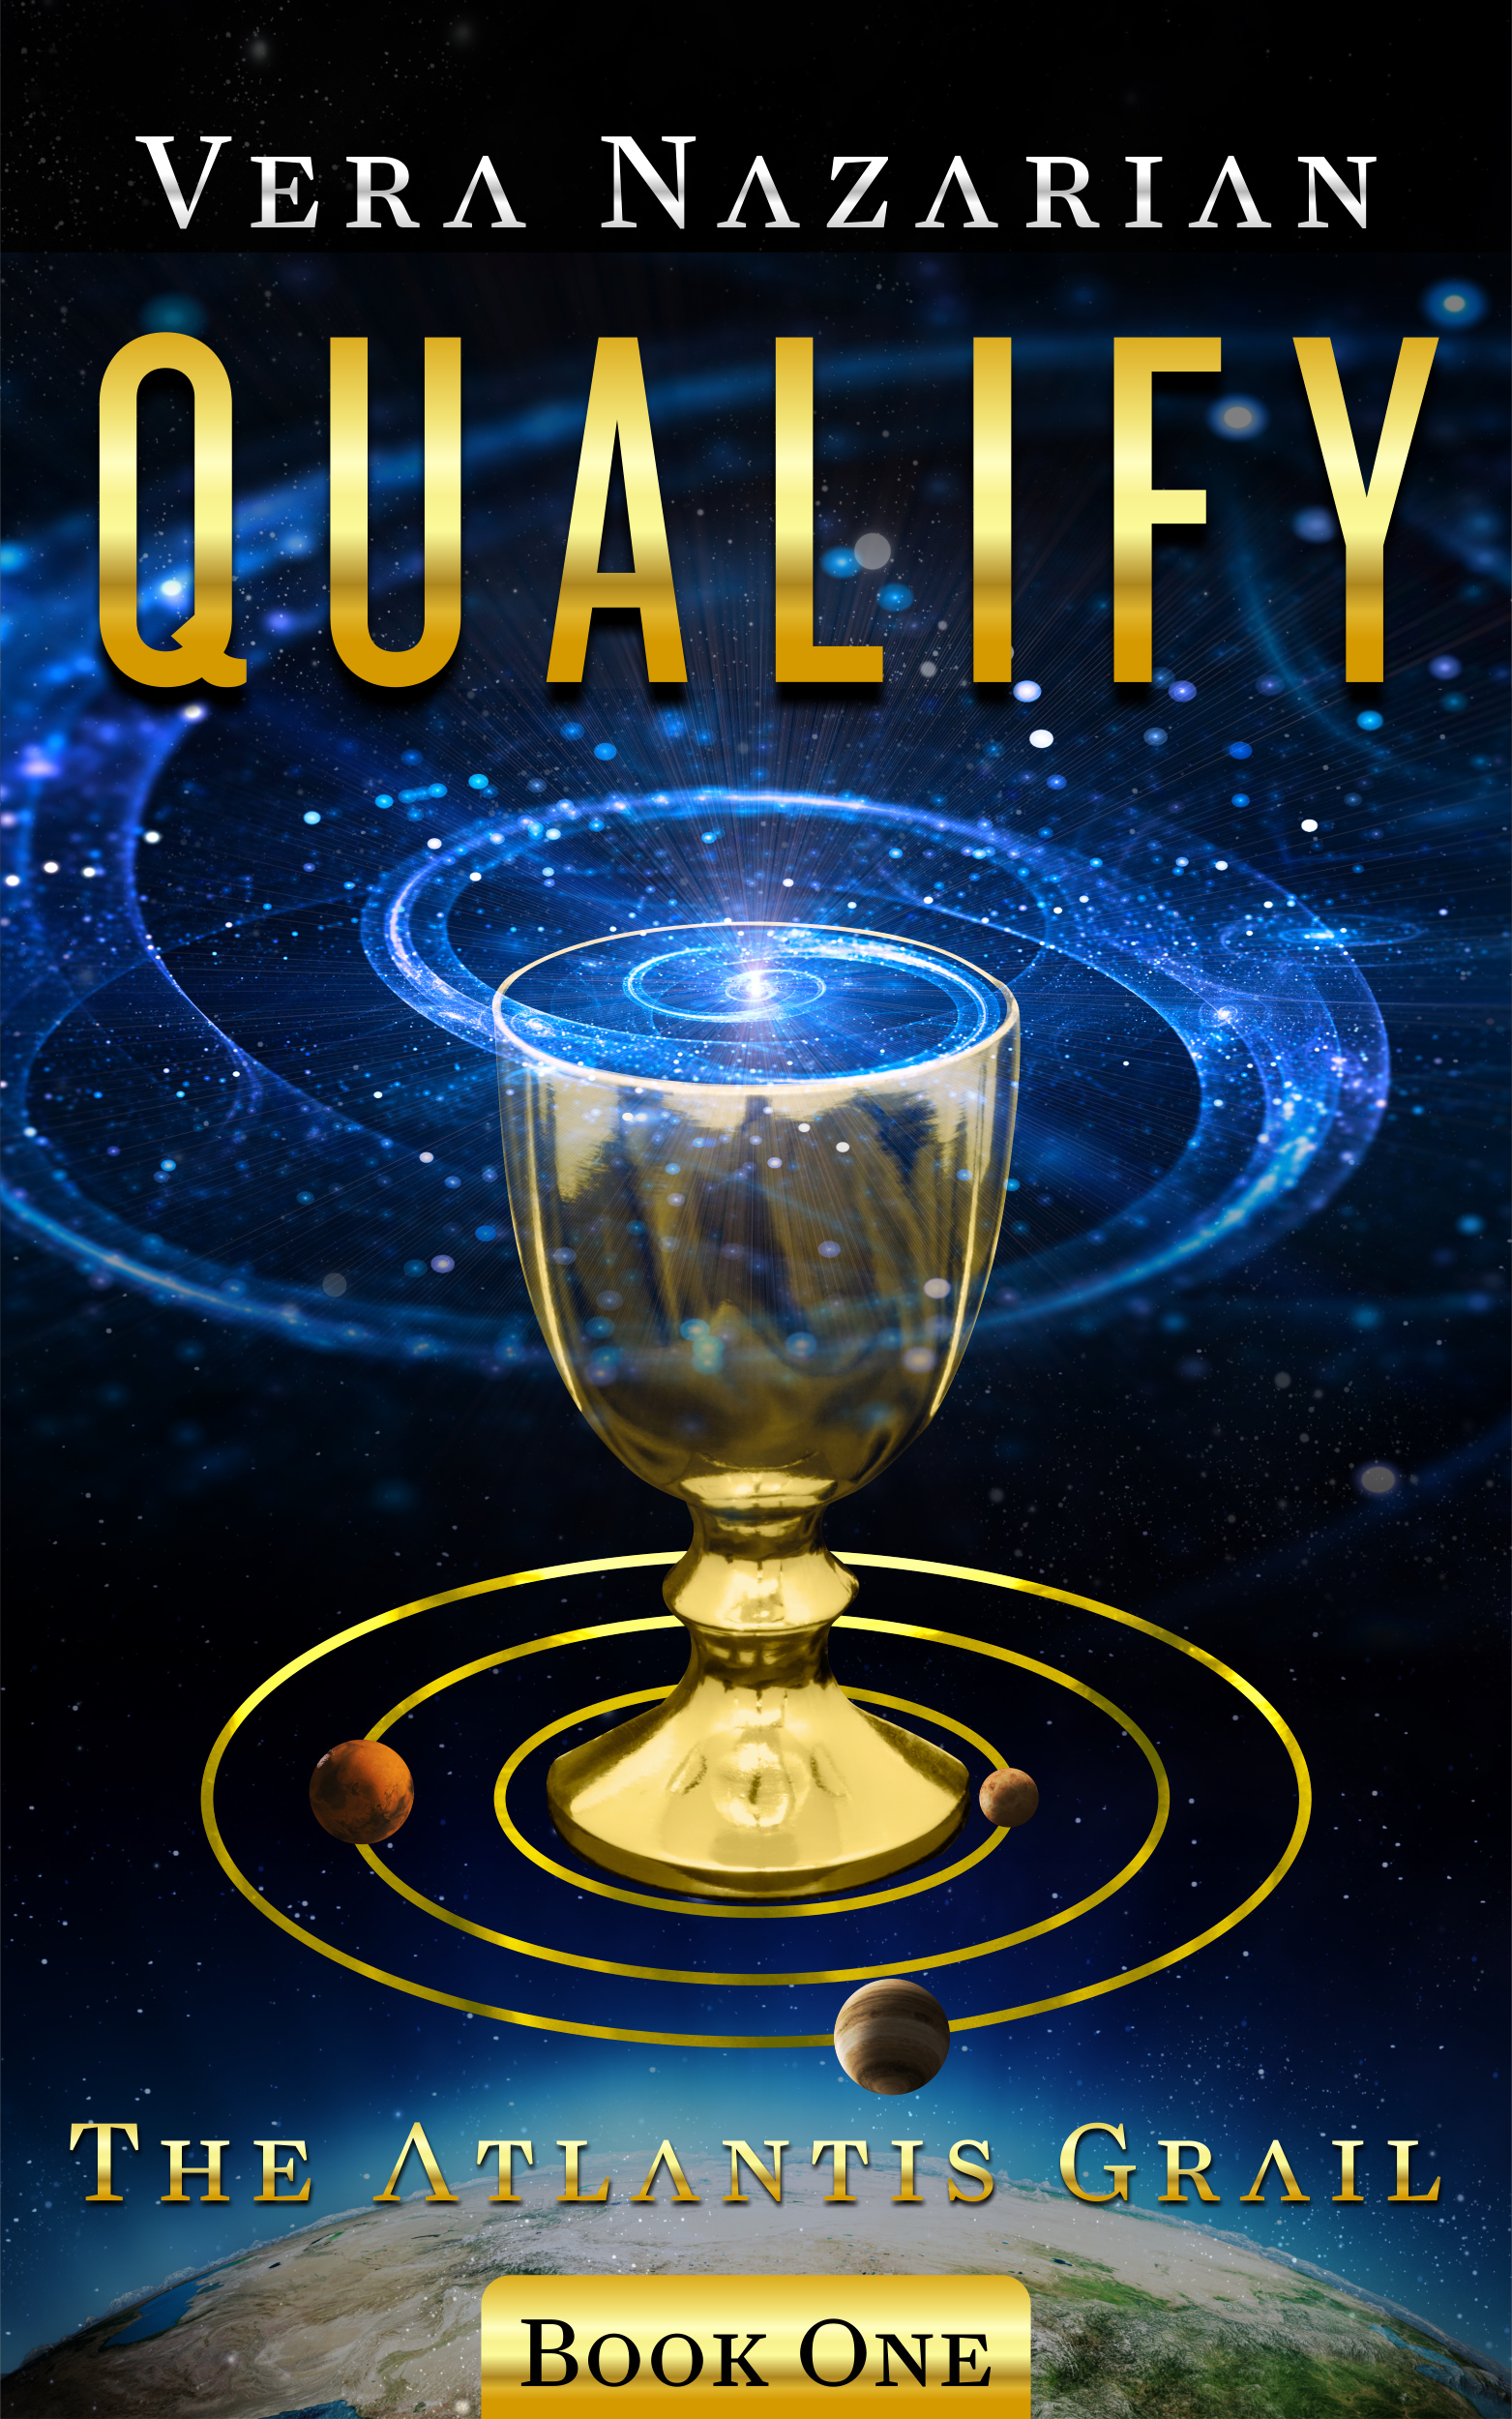 Book cover for Qualify, showing a golden grail with three planets orbiting its base and a blue-tinted spiral galaxy centred at the top of the grail and spiraling outwards